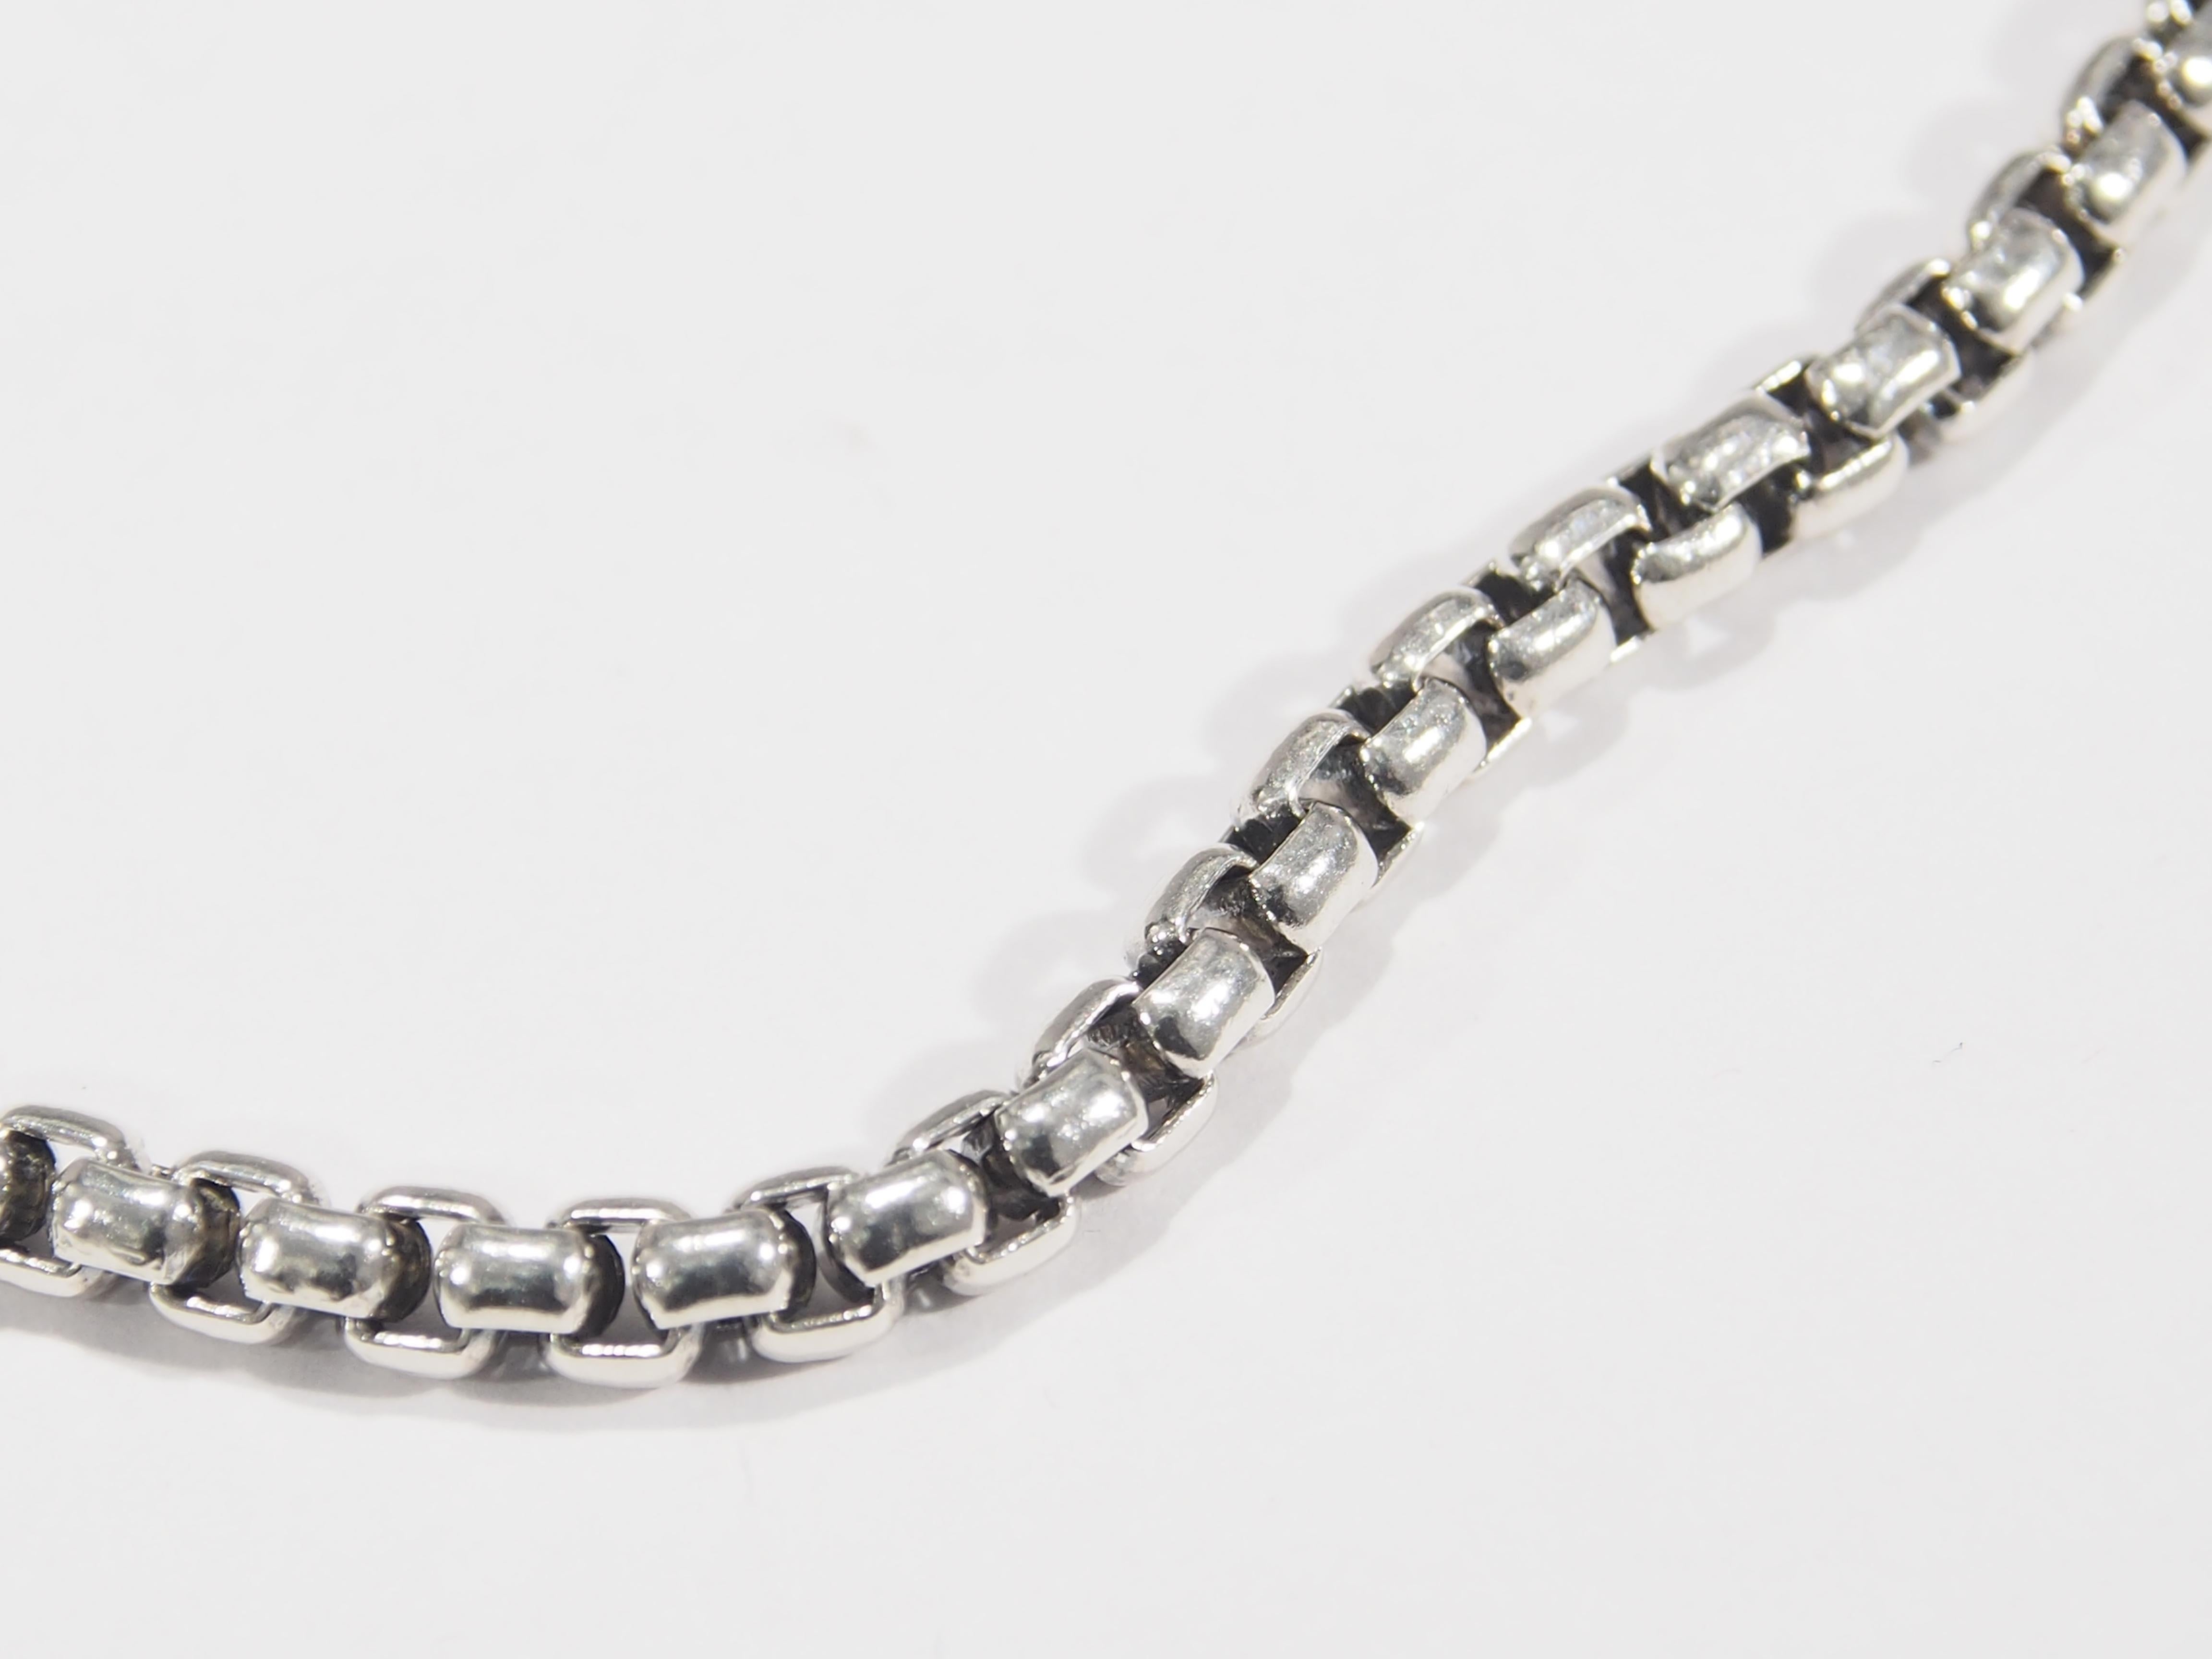 From one of the favorite jewelry designers, David Yurman is his classic Silver Box Chain. This meticulously crafted Chain is 18 inches in length and 3.6mm in width. David Yurman designs his chains to be worn alone, layered, or complemented with